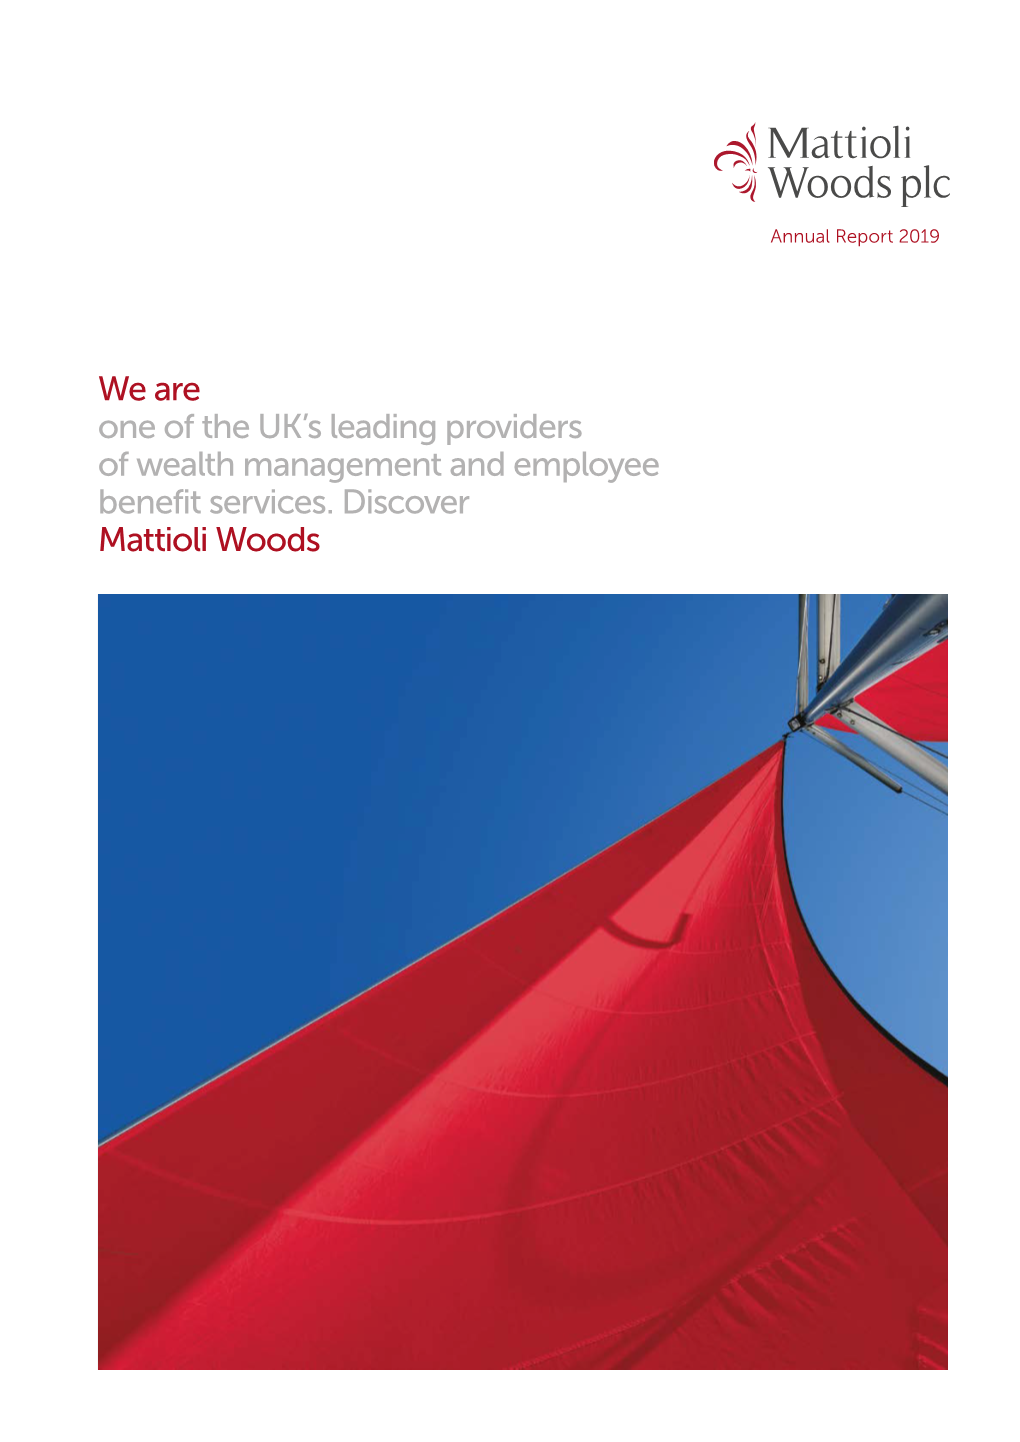 We Are One of the UK's Leading Providers of Wealth Management